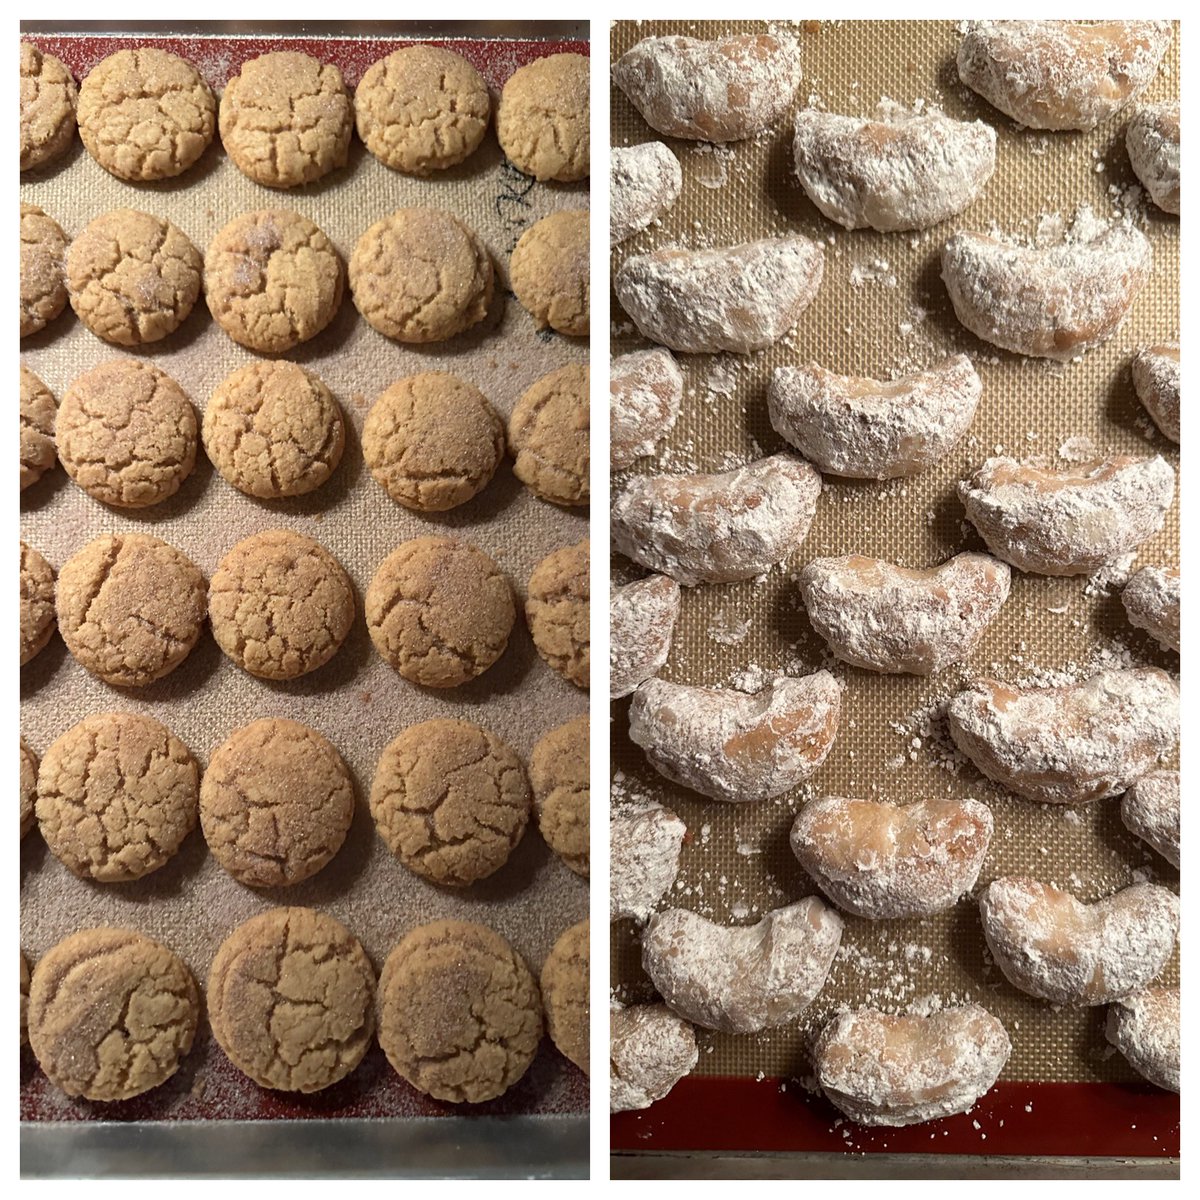 One of my favorite holiday traditions…baking for our neighbors. Biscochitos and kifflins done, tomorrow cranberry orange pecan bread and spiced nut mix. #holidaytraditions